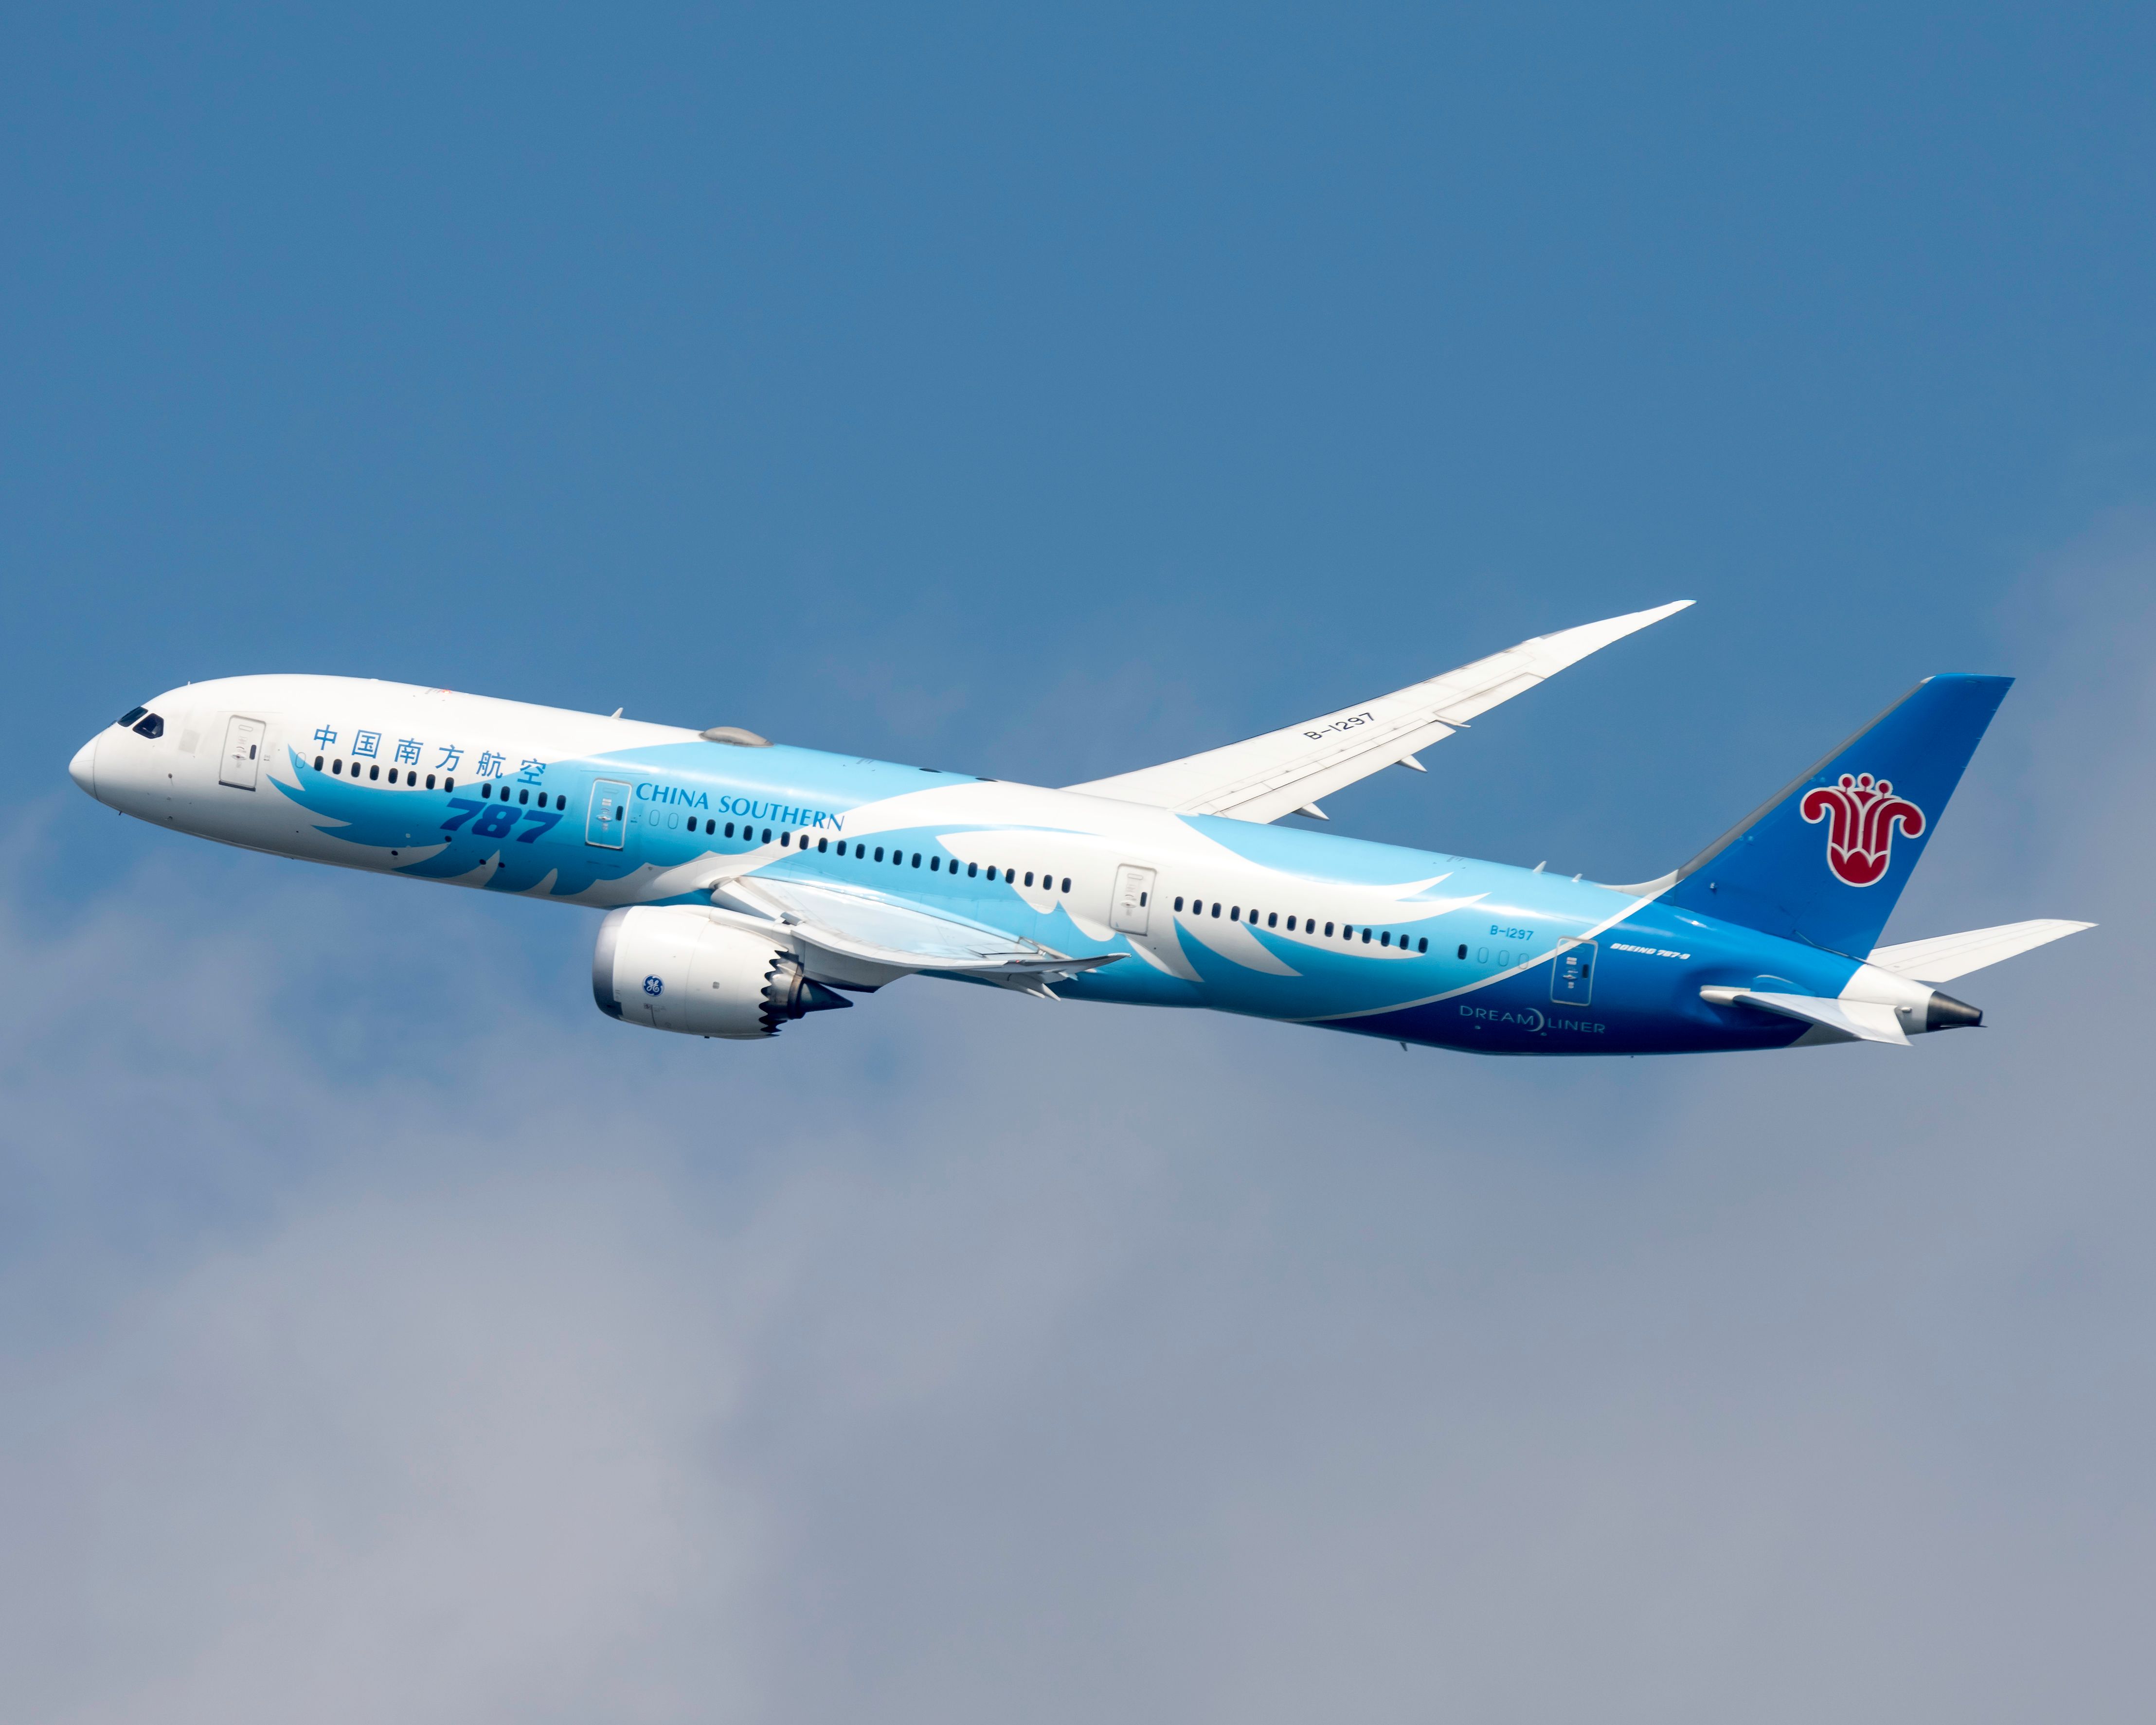 China Southern Airlines Boeing 787 Dreamliner